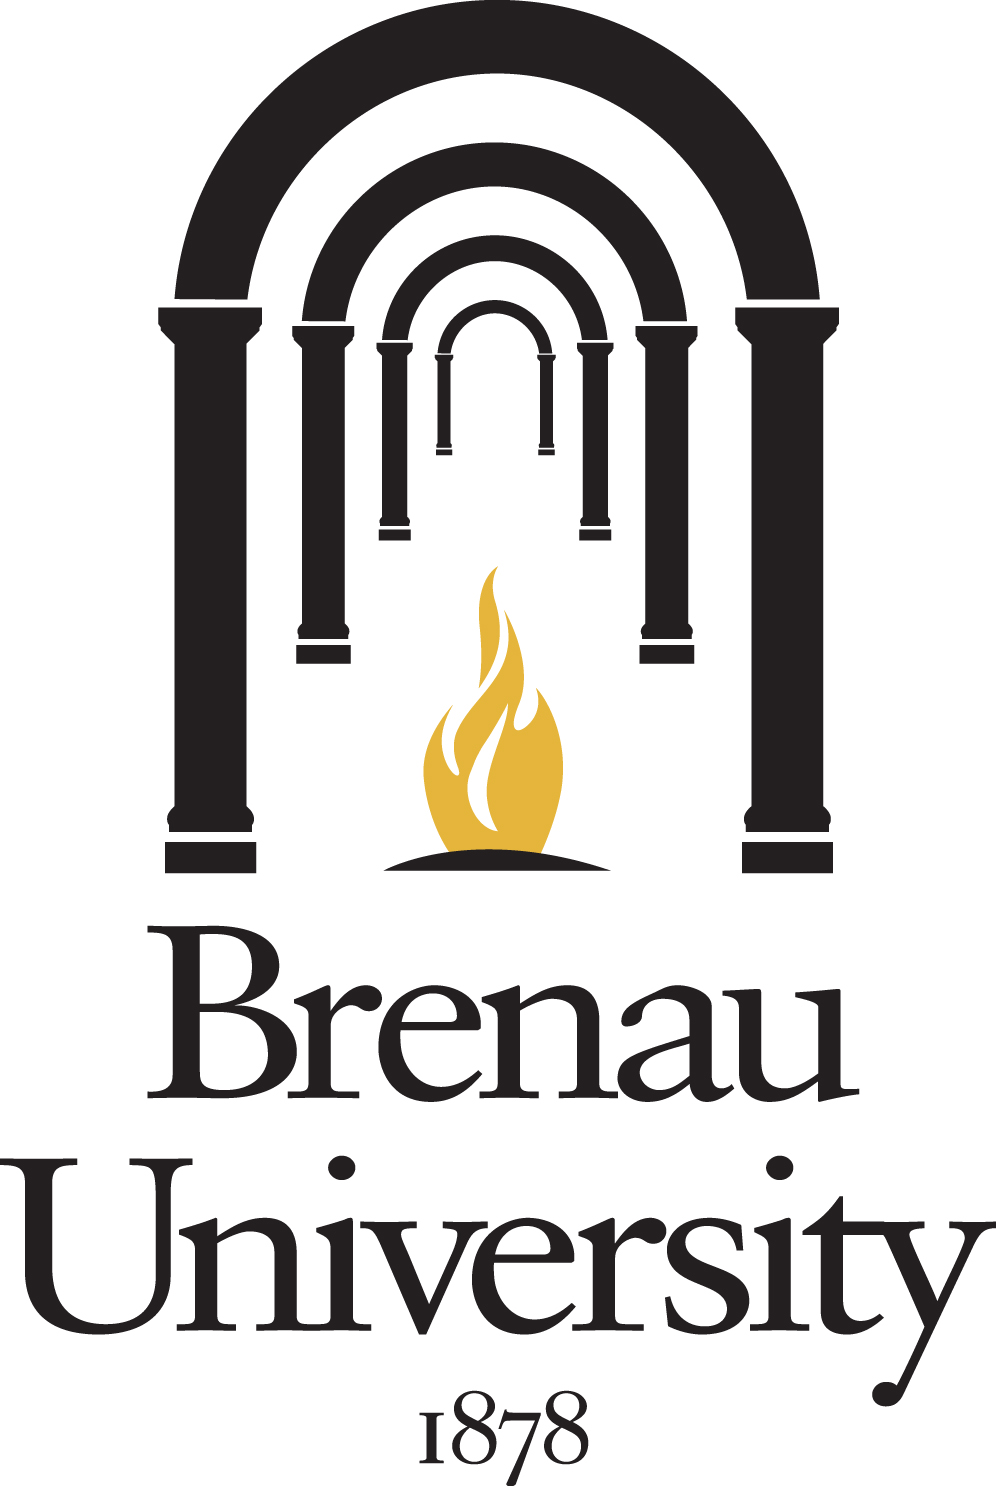 Brenau University Adds a Vice President and Strengthens Provost